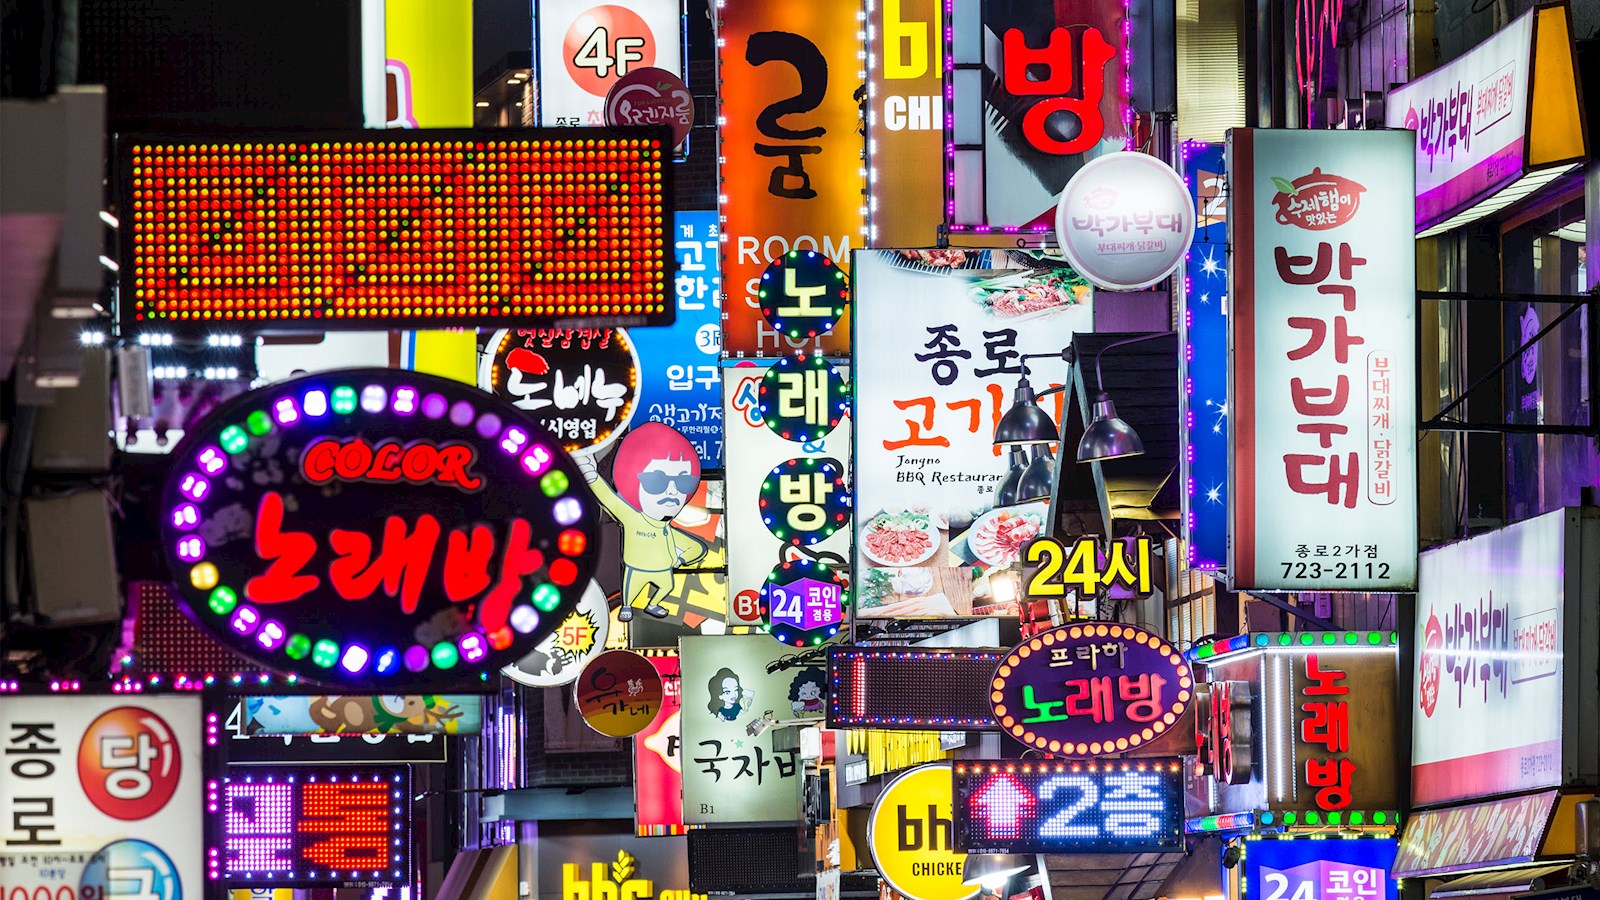 Neon signs and lights on a street in Korea